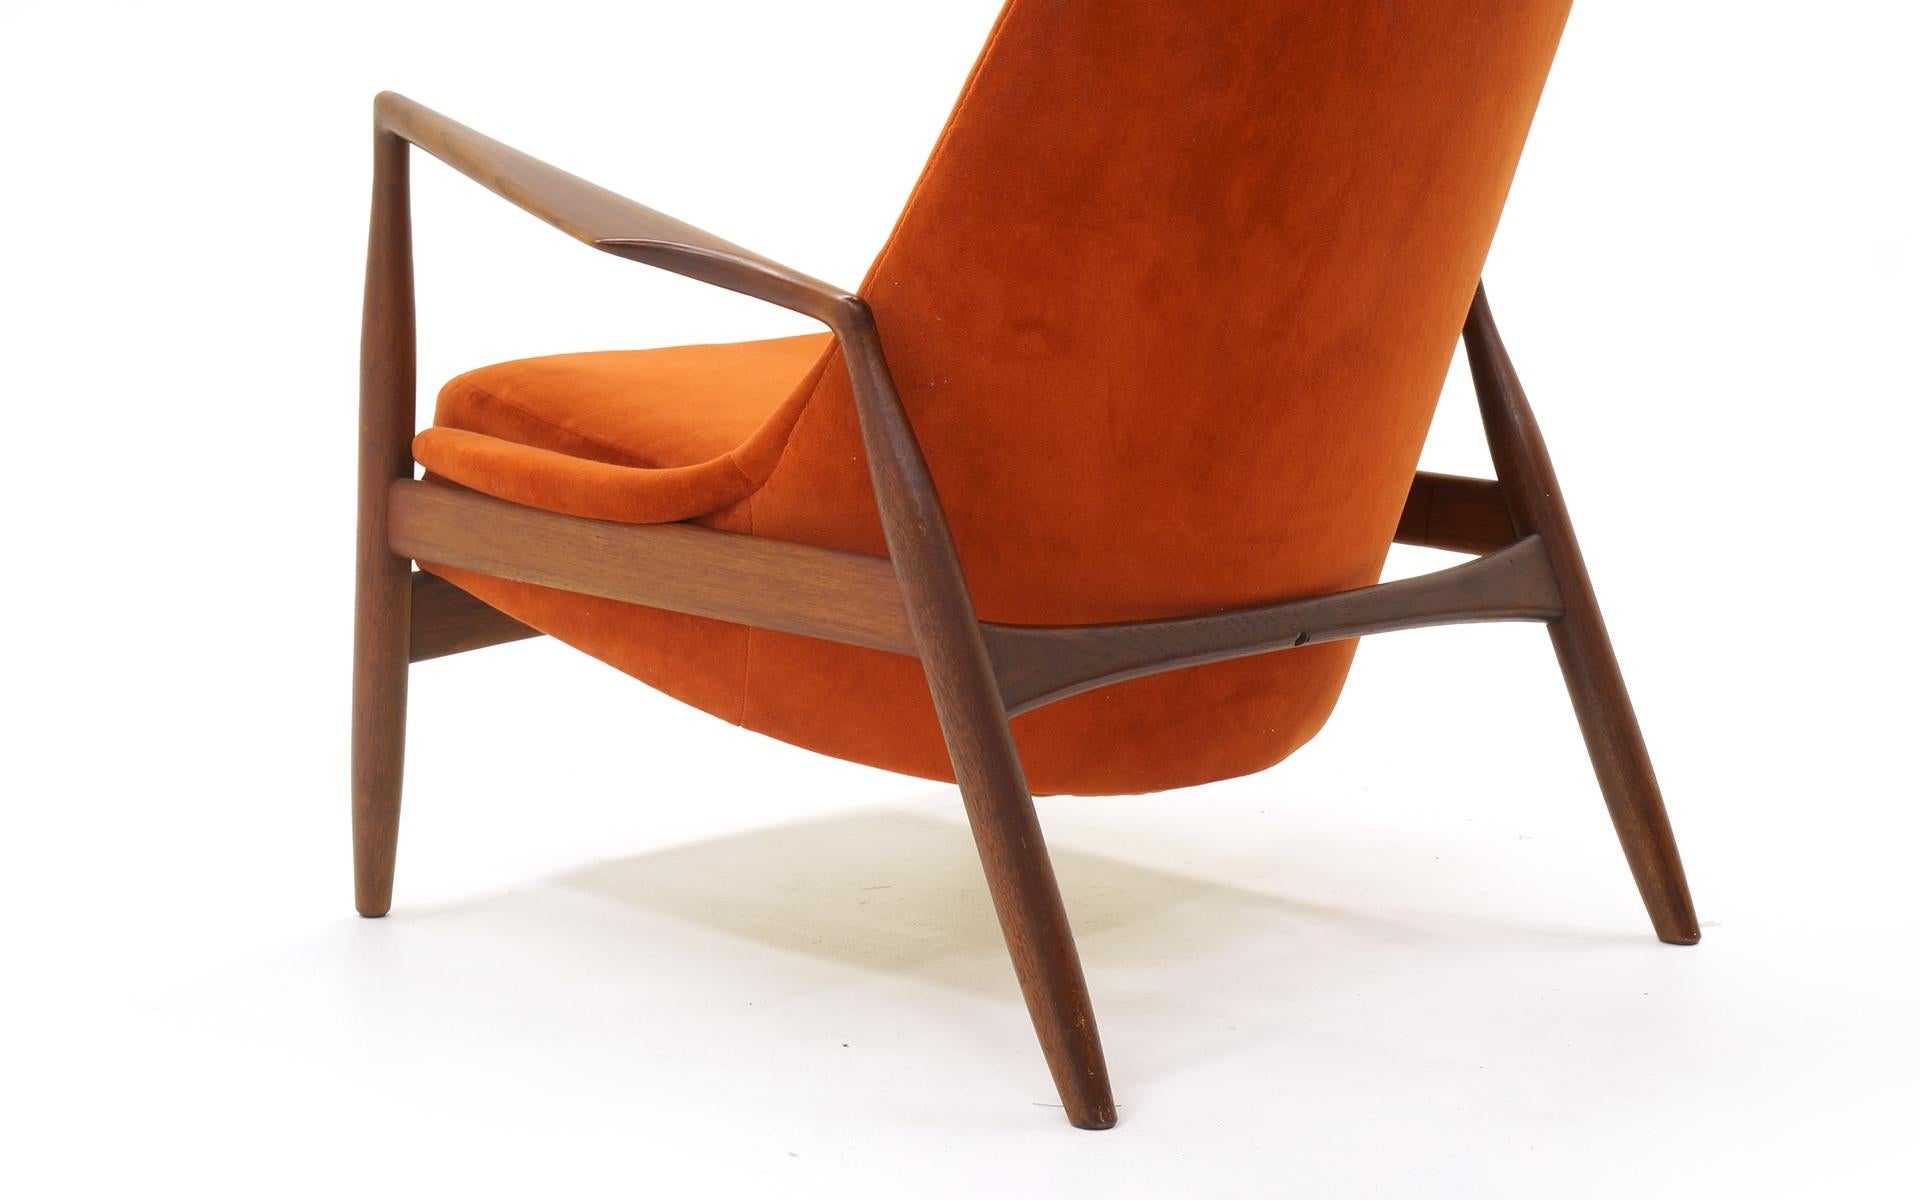 Upholstery High Back Seal or Sälen Lounge Chair by Kofod-Larsen for OPE, Sweden, 1960.